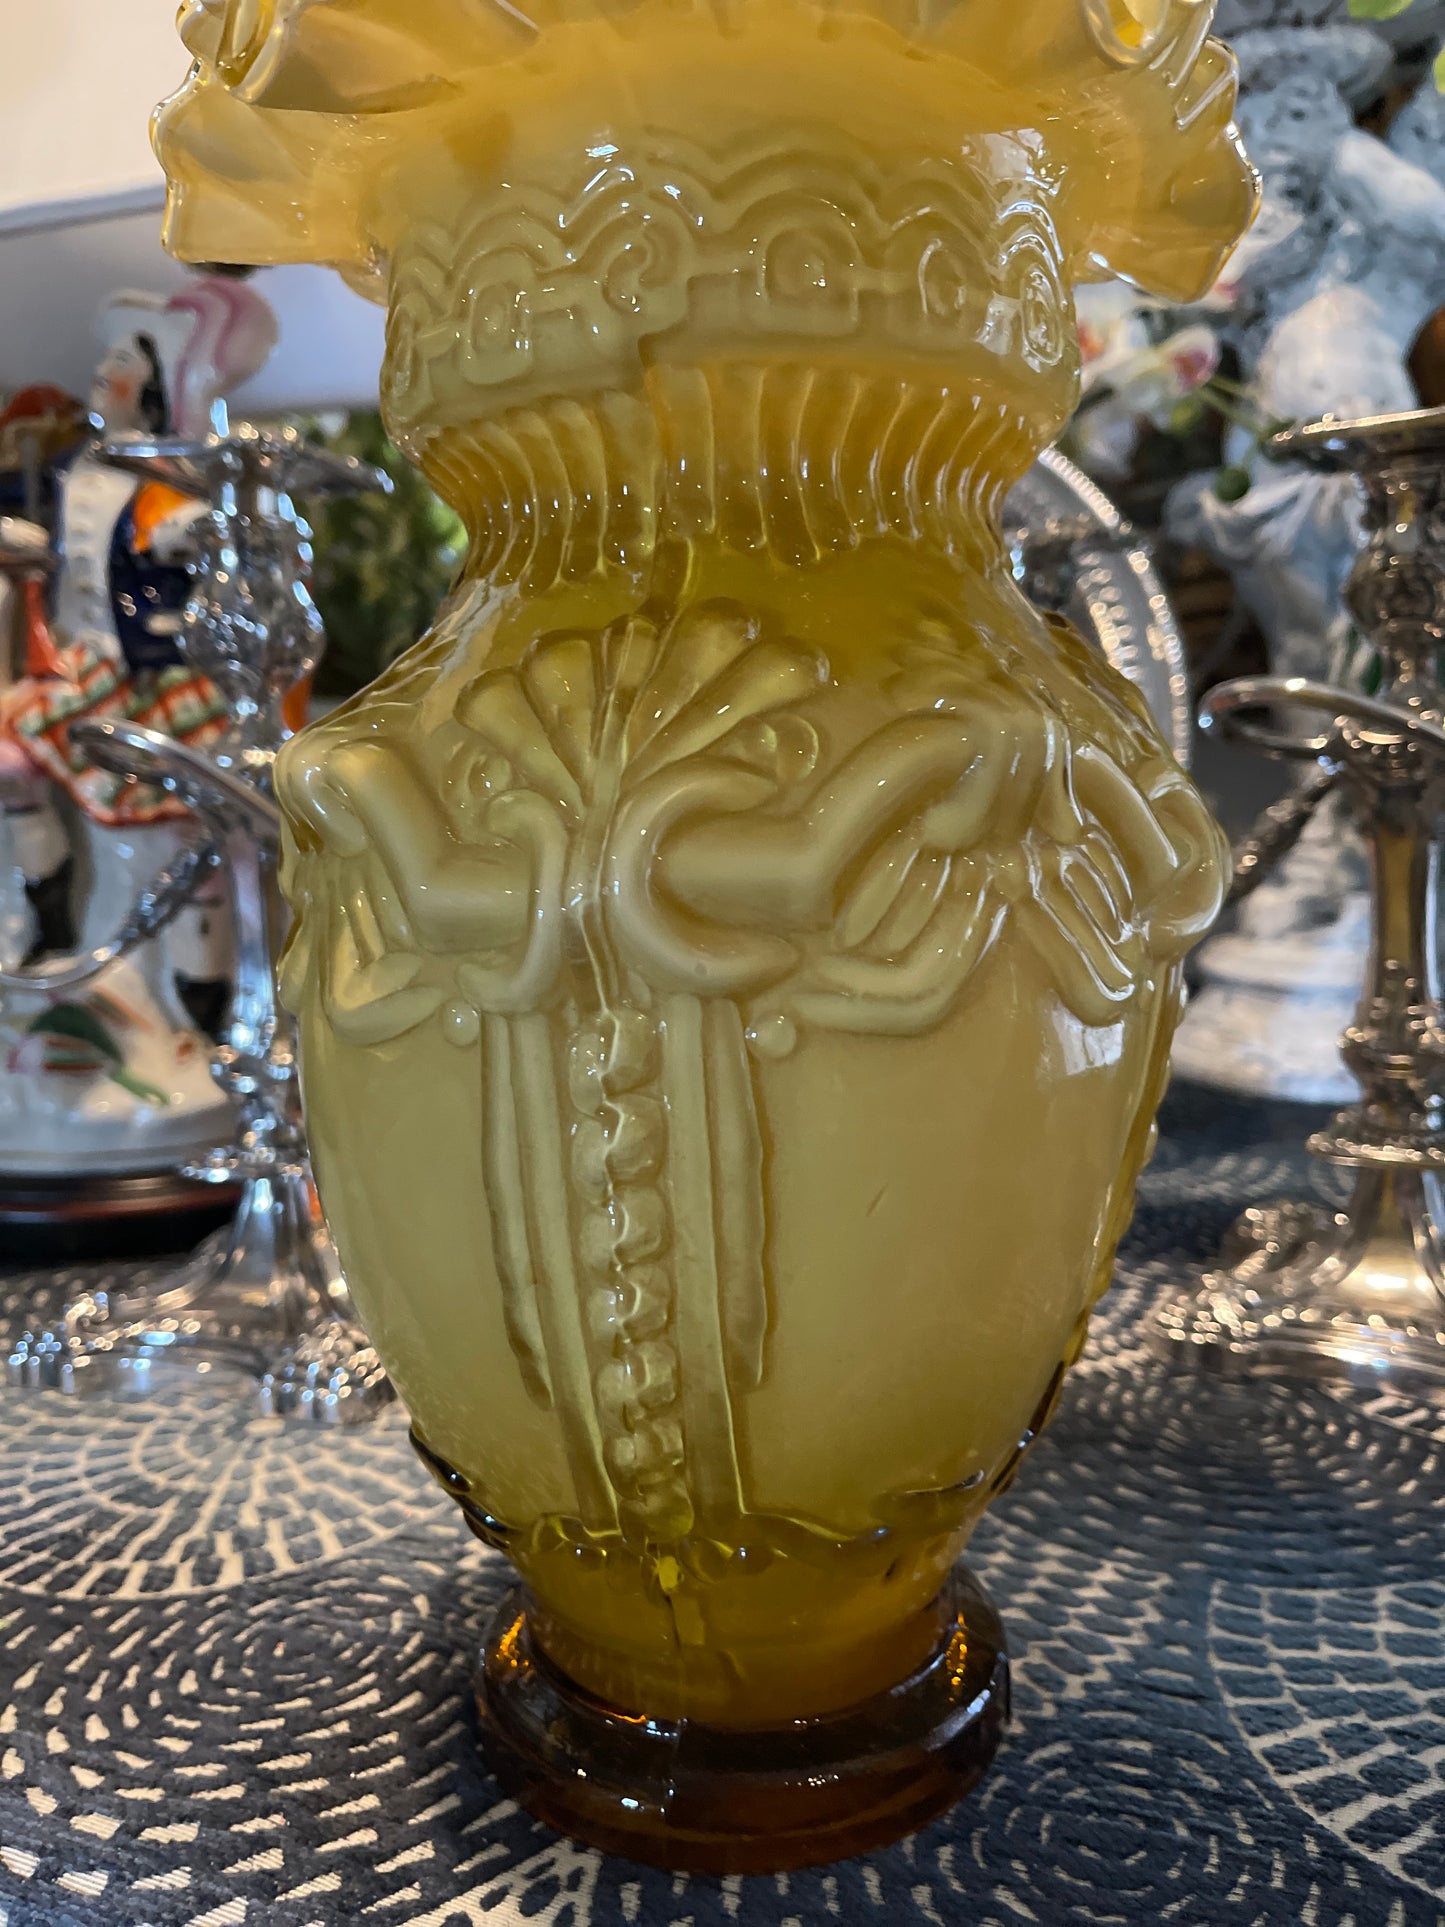 Vintage Art Deco Vase with Cased Ruffle Hand Blown Glass Vase, Mid 20th Century Victorian Vase in Butterscotch, Fantastic Detail